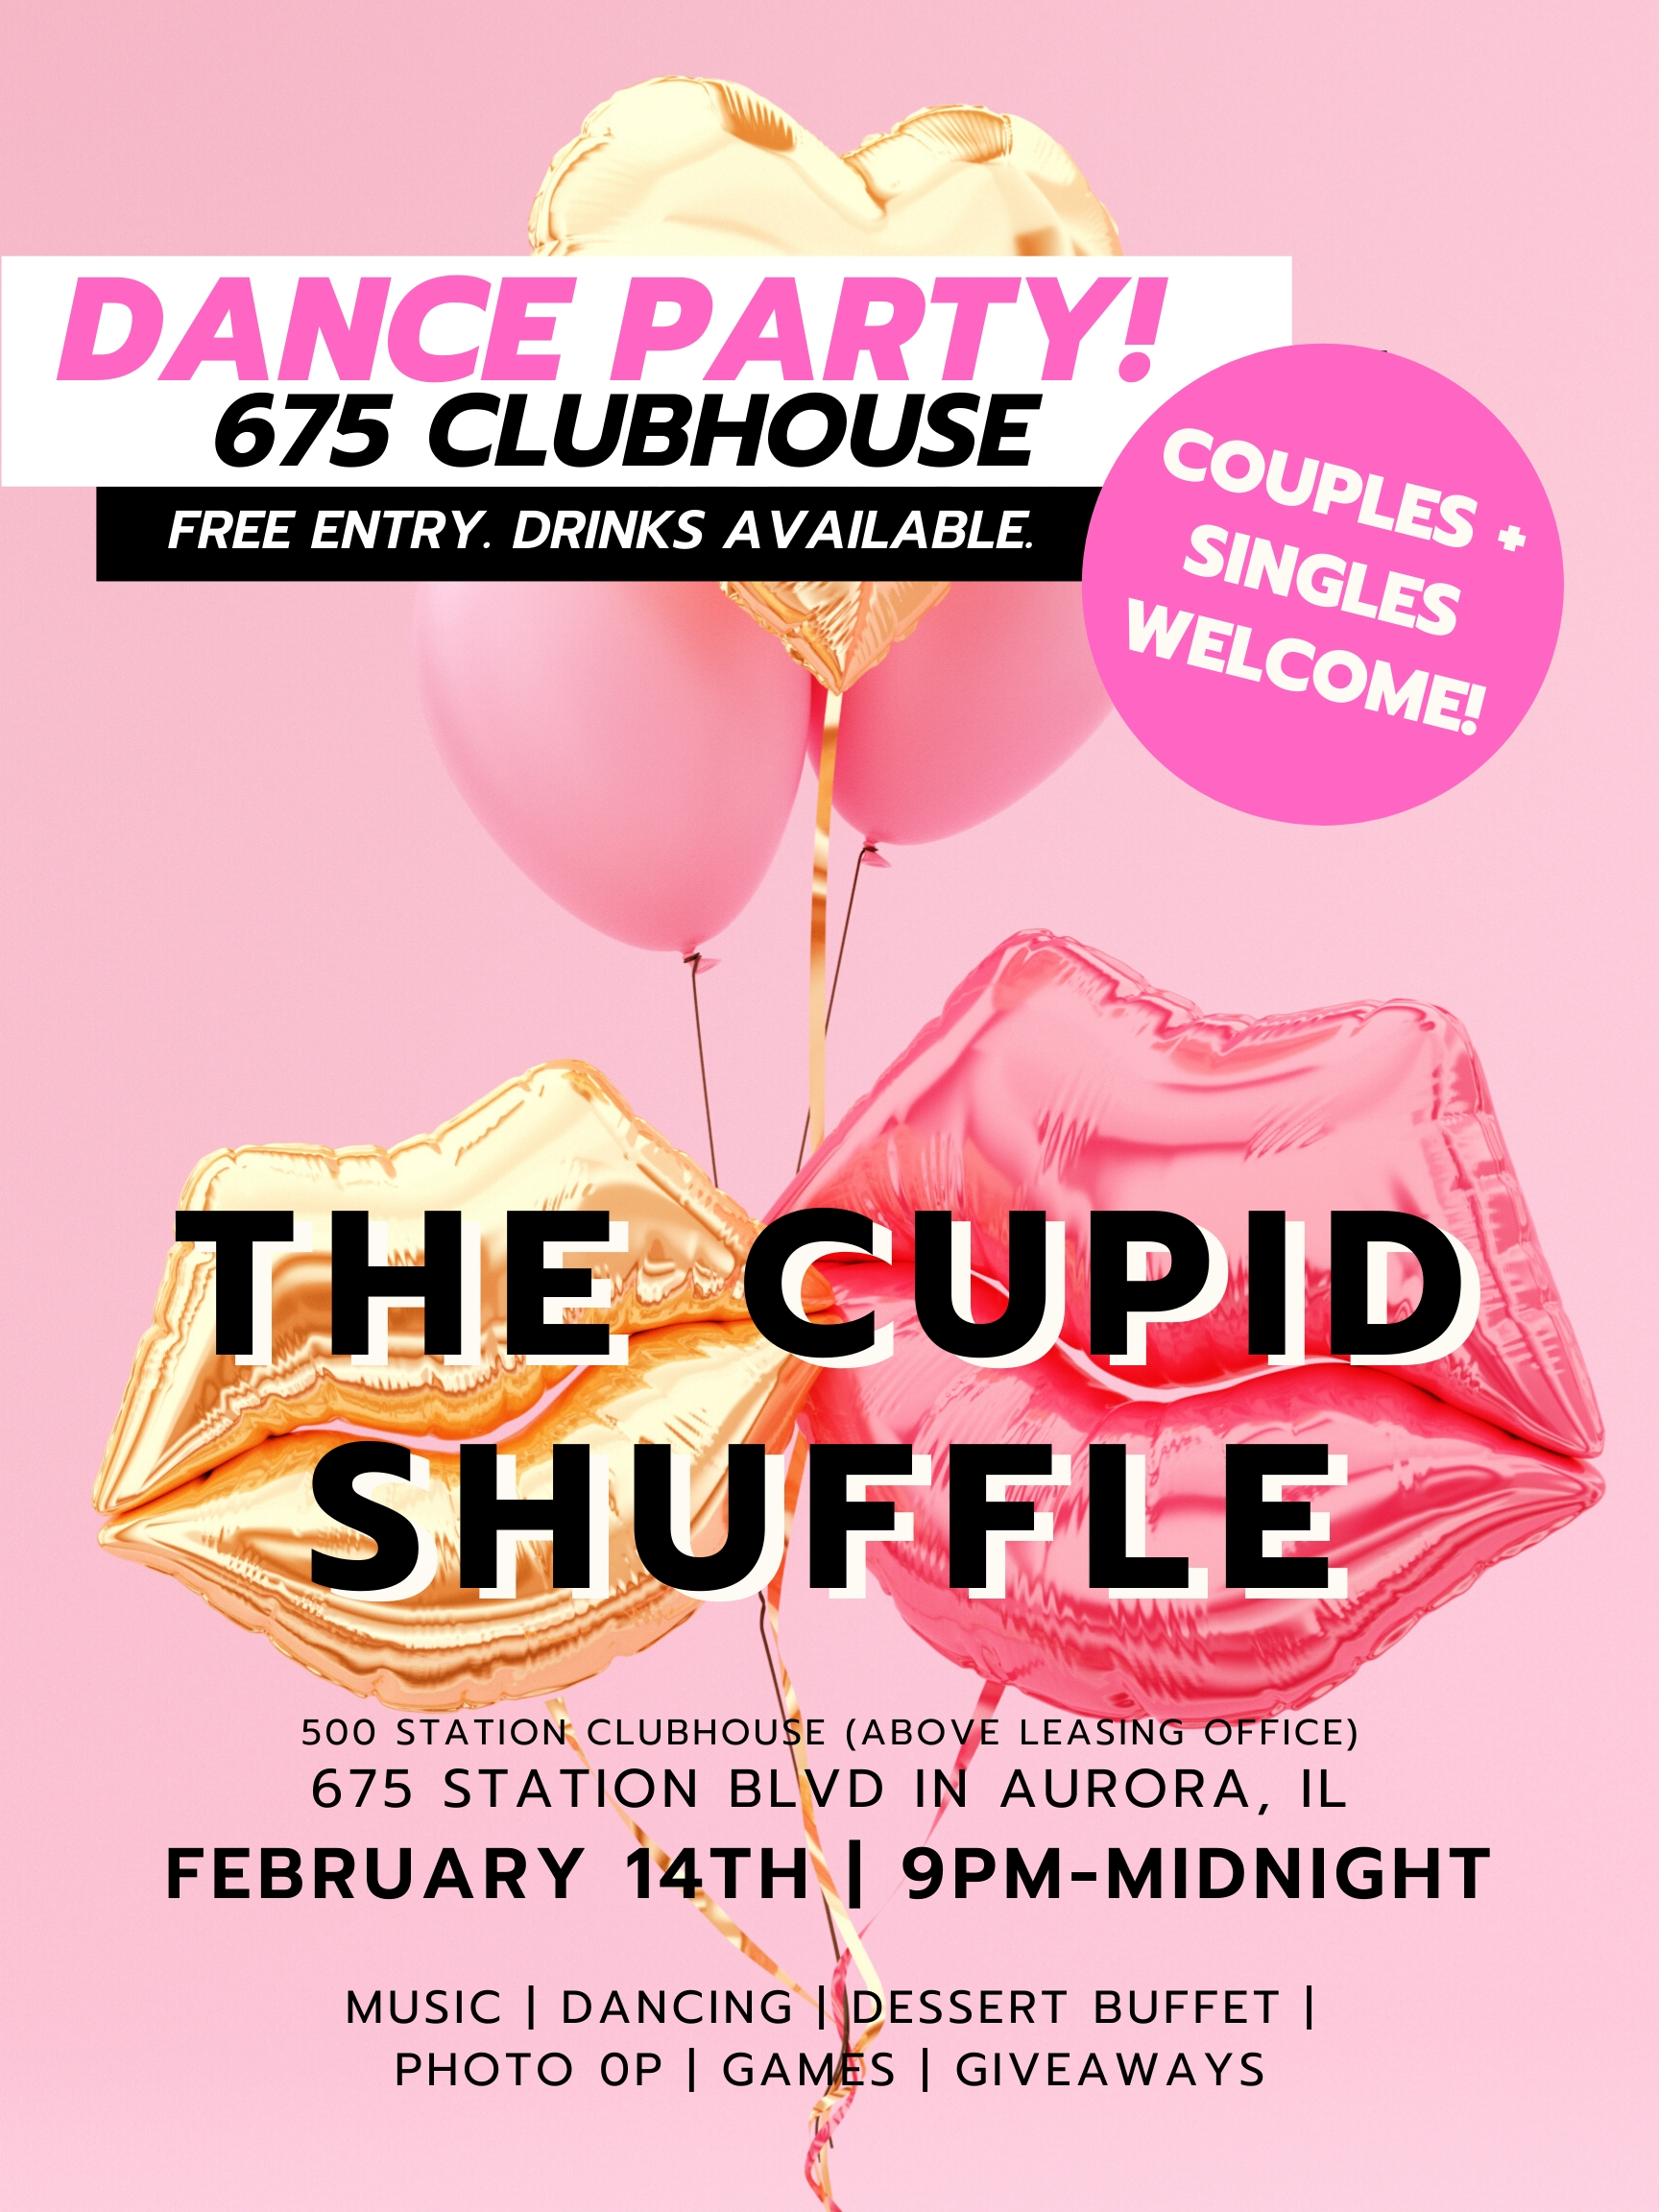 The Cupid Shuffle at 500 Station Blvd